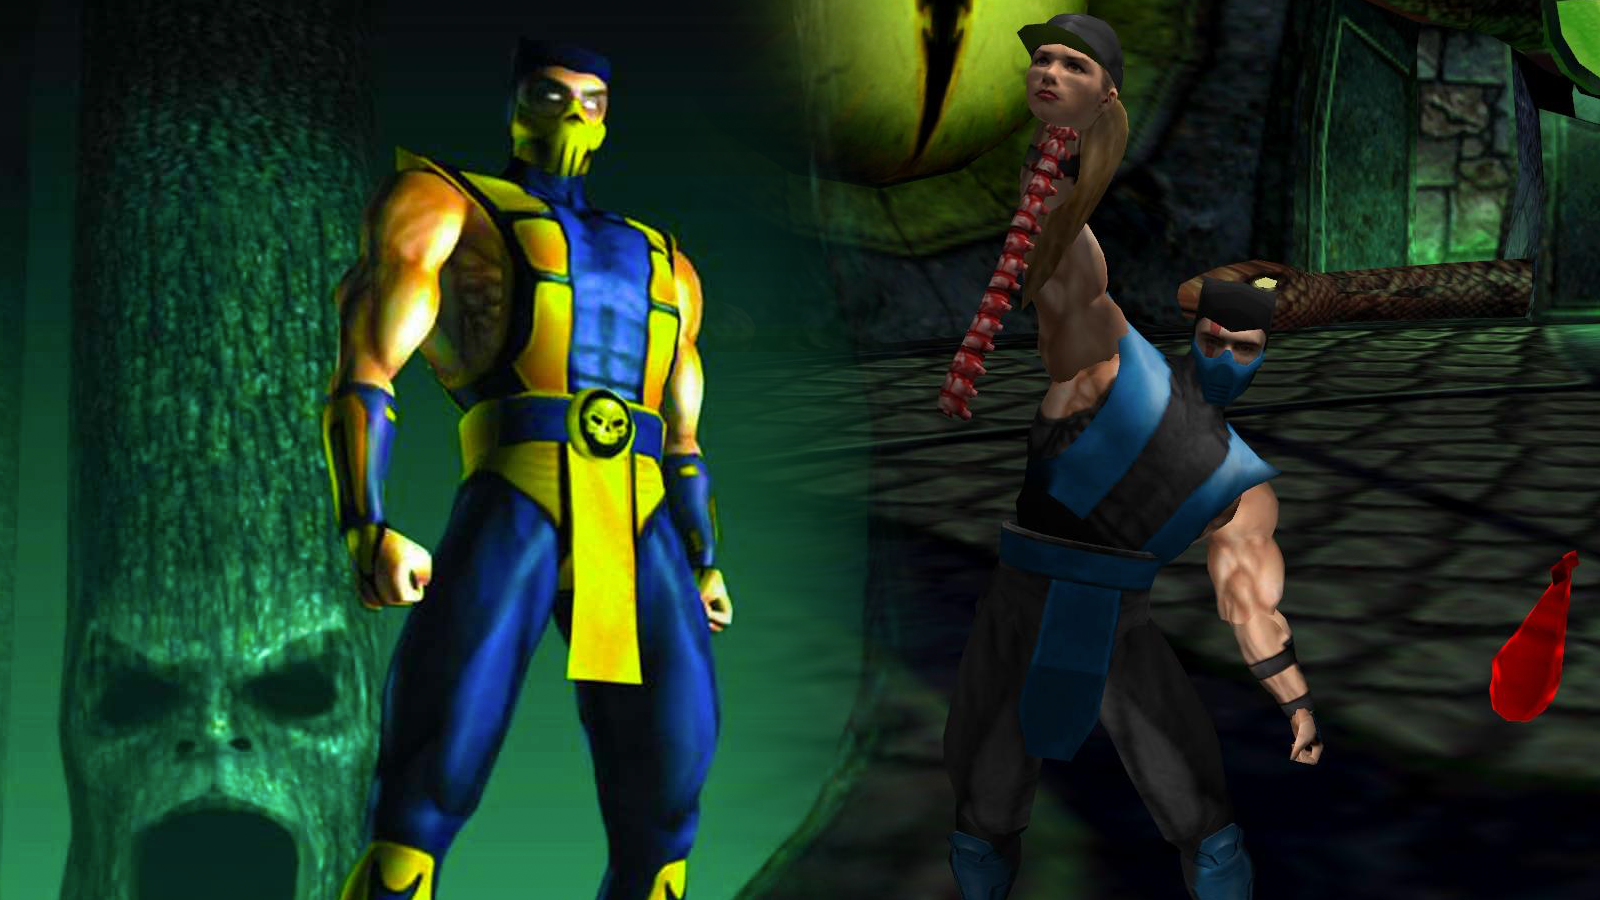 Ed Boon confirms that convincing video of Mortal Kombat 4 being